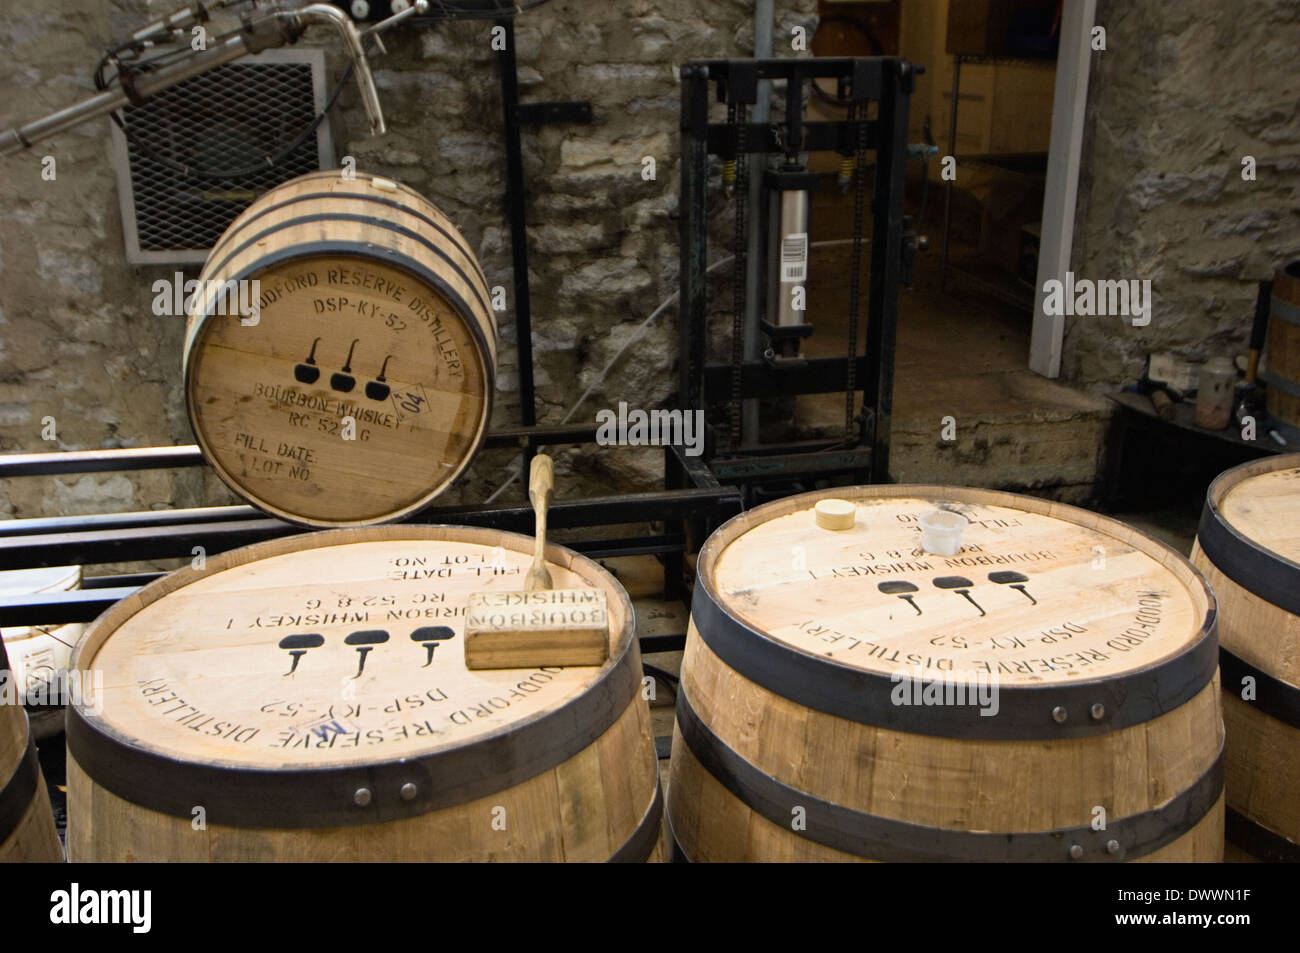 Station Used to Fill Barrels with White Whiskey for Aging at Woodford Reserve Distillery in Woodford County, Kentucky Stock Photo